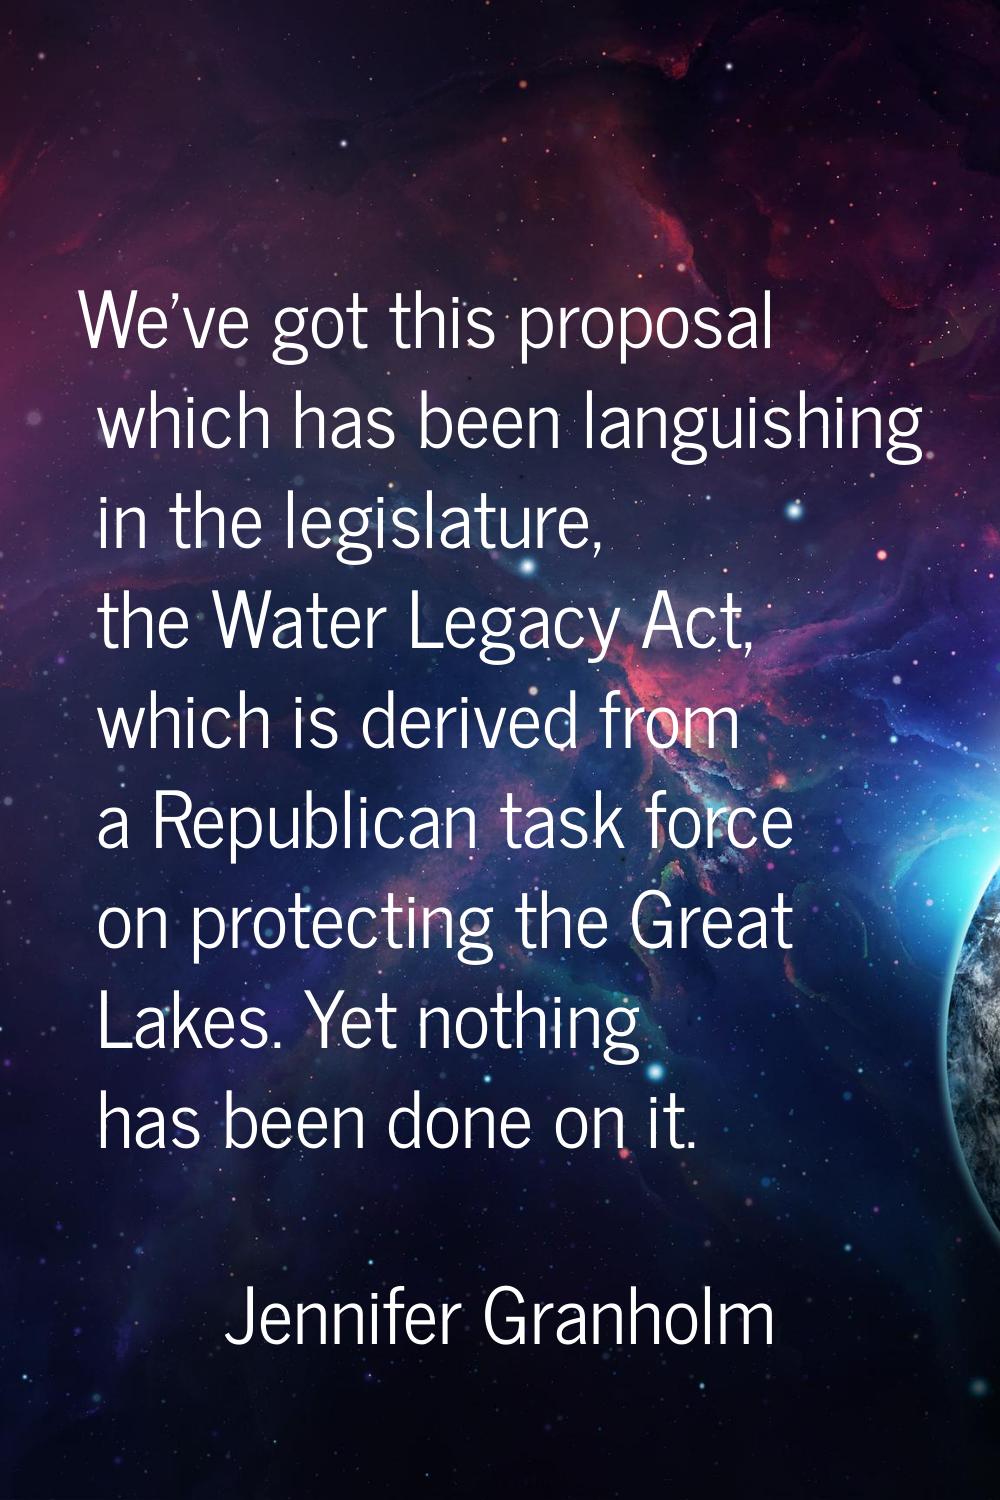 We've got this proposal which has been languishing in the legislature, the Water Legacy Act, which 